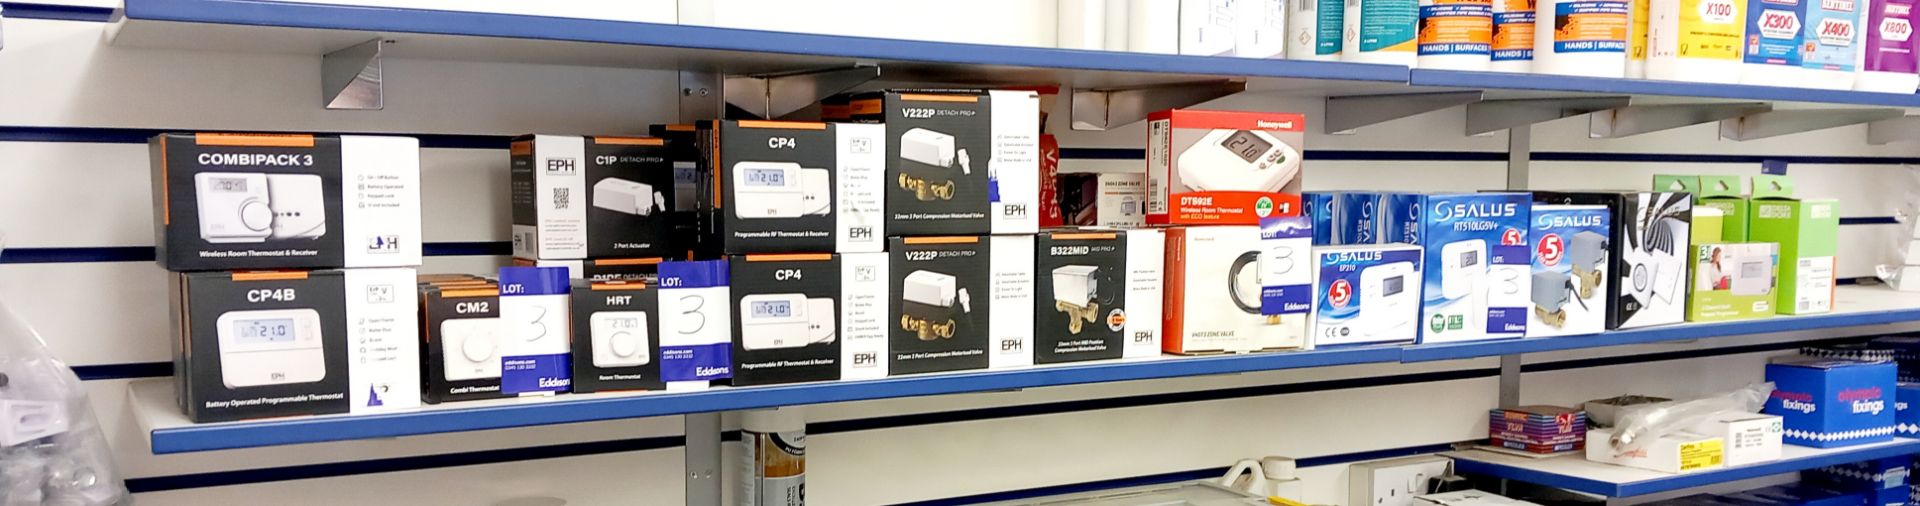 Quantity of various EPH, Honeywell and Salus thermostats and valves to shelf (approx. 50 units).